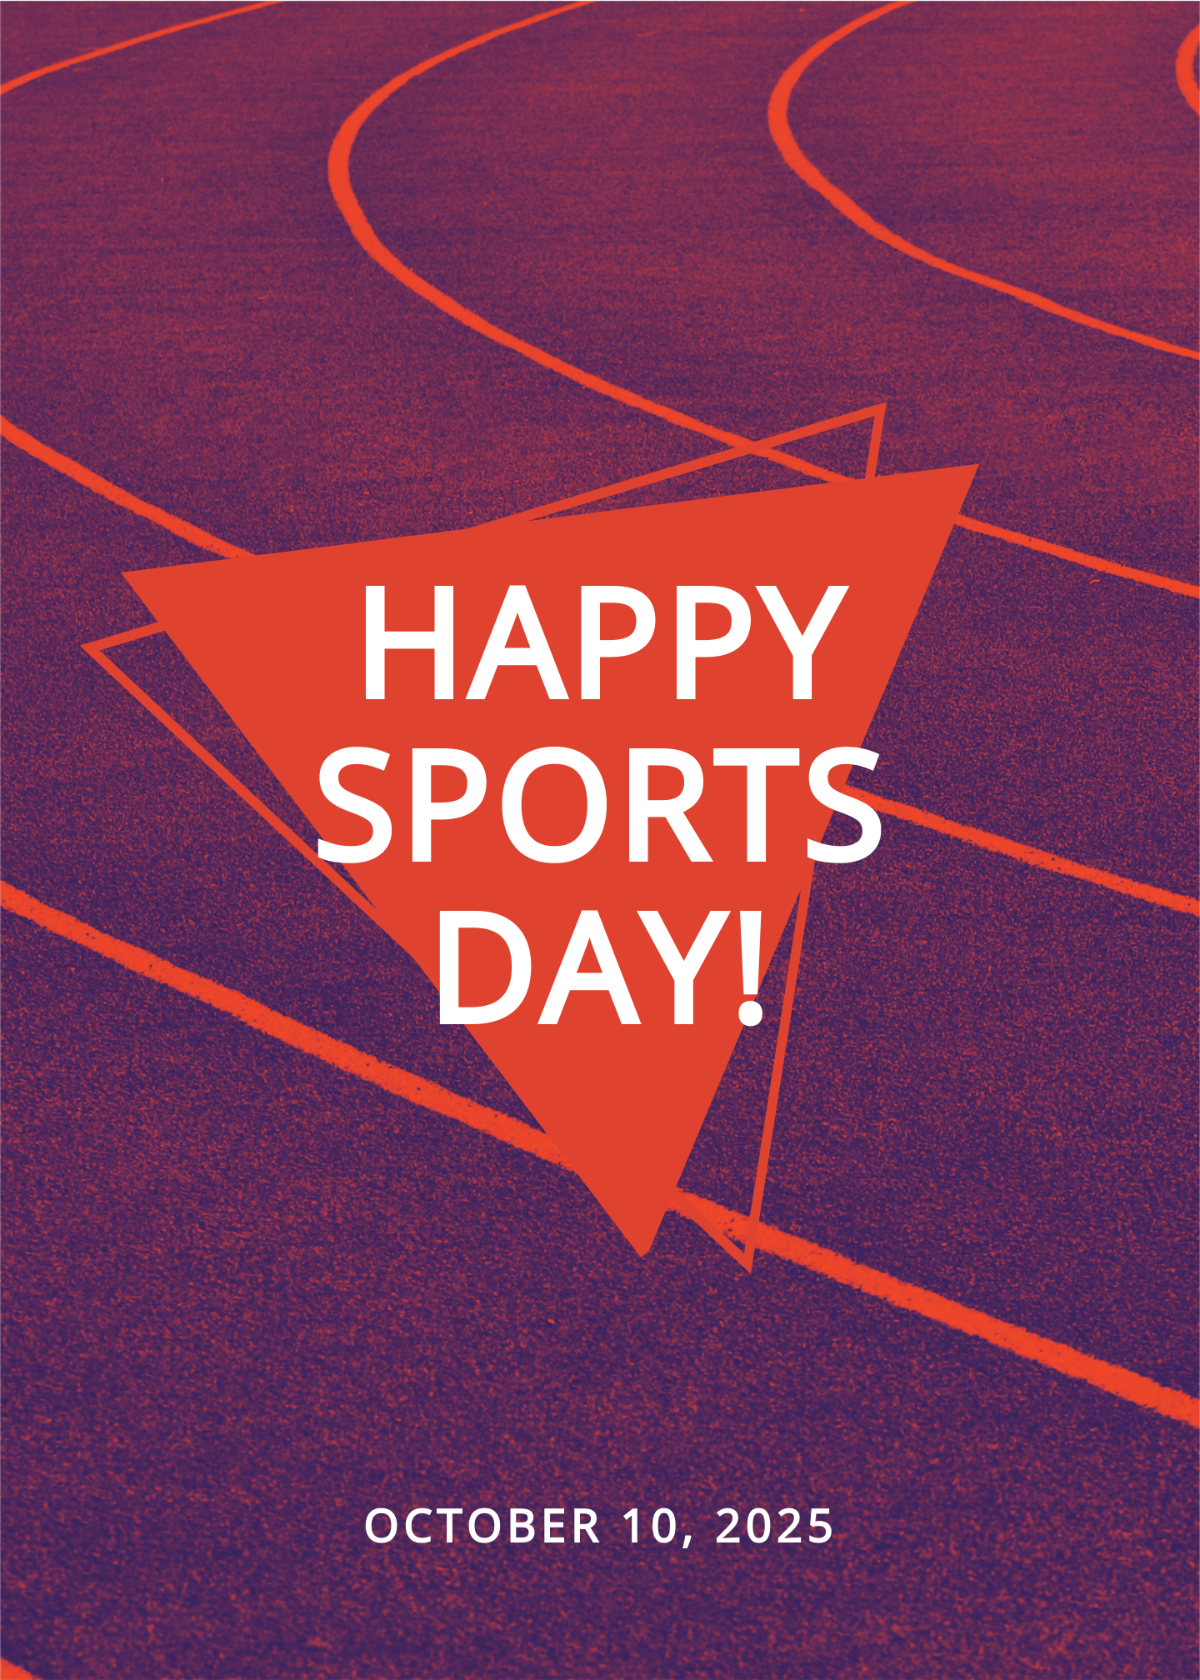 Sports Day Greeting Card Template